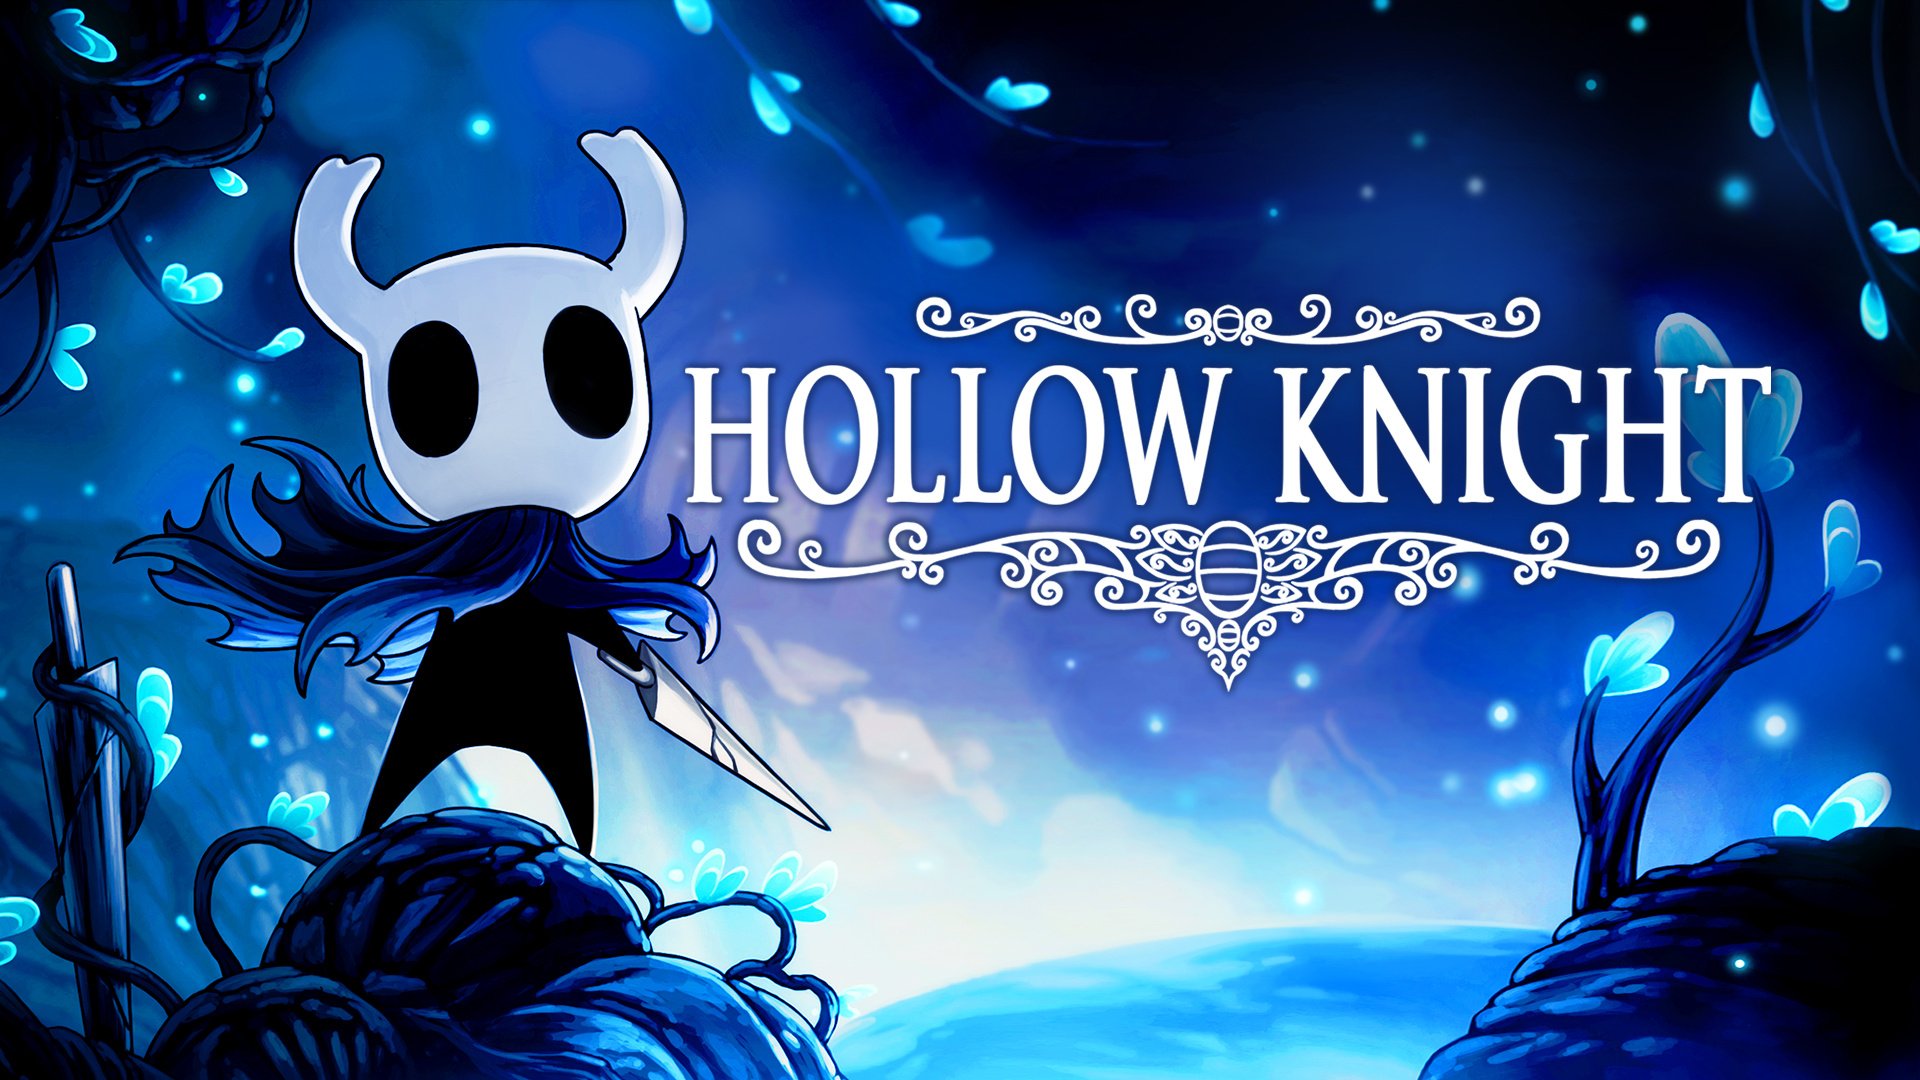 Hollow knight save file